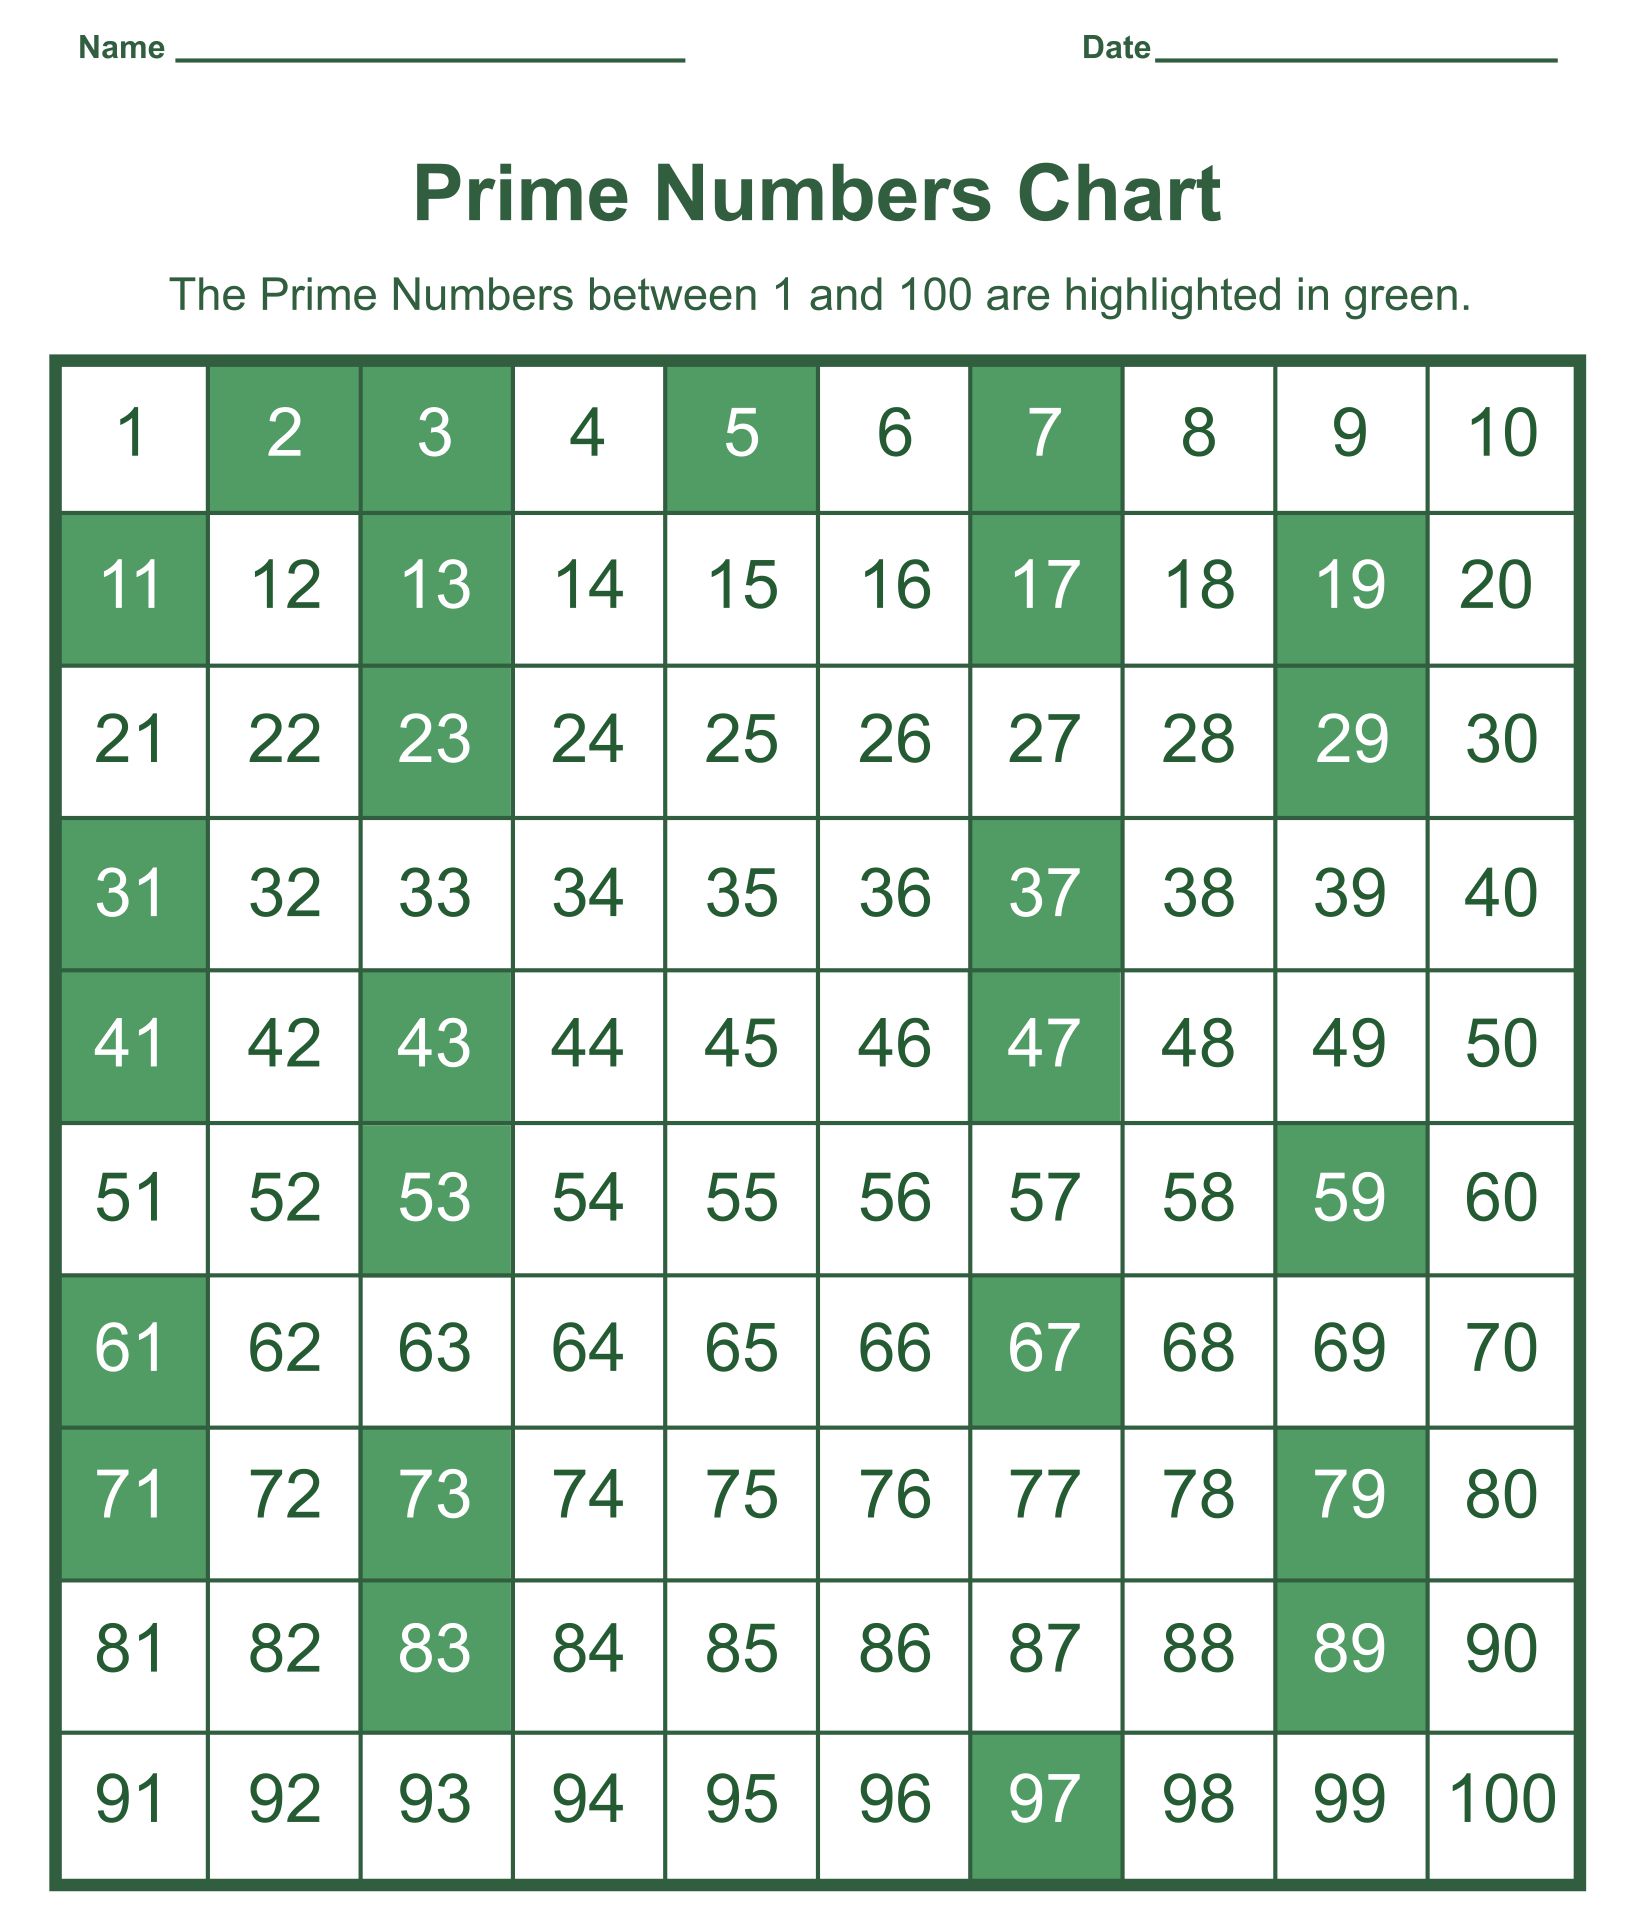 Prime Numbers From 1 To 100 Chart